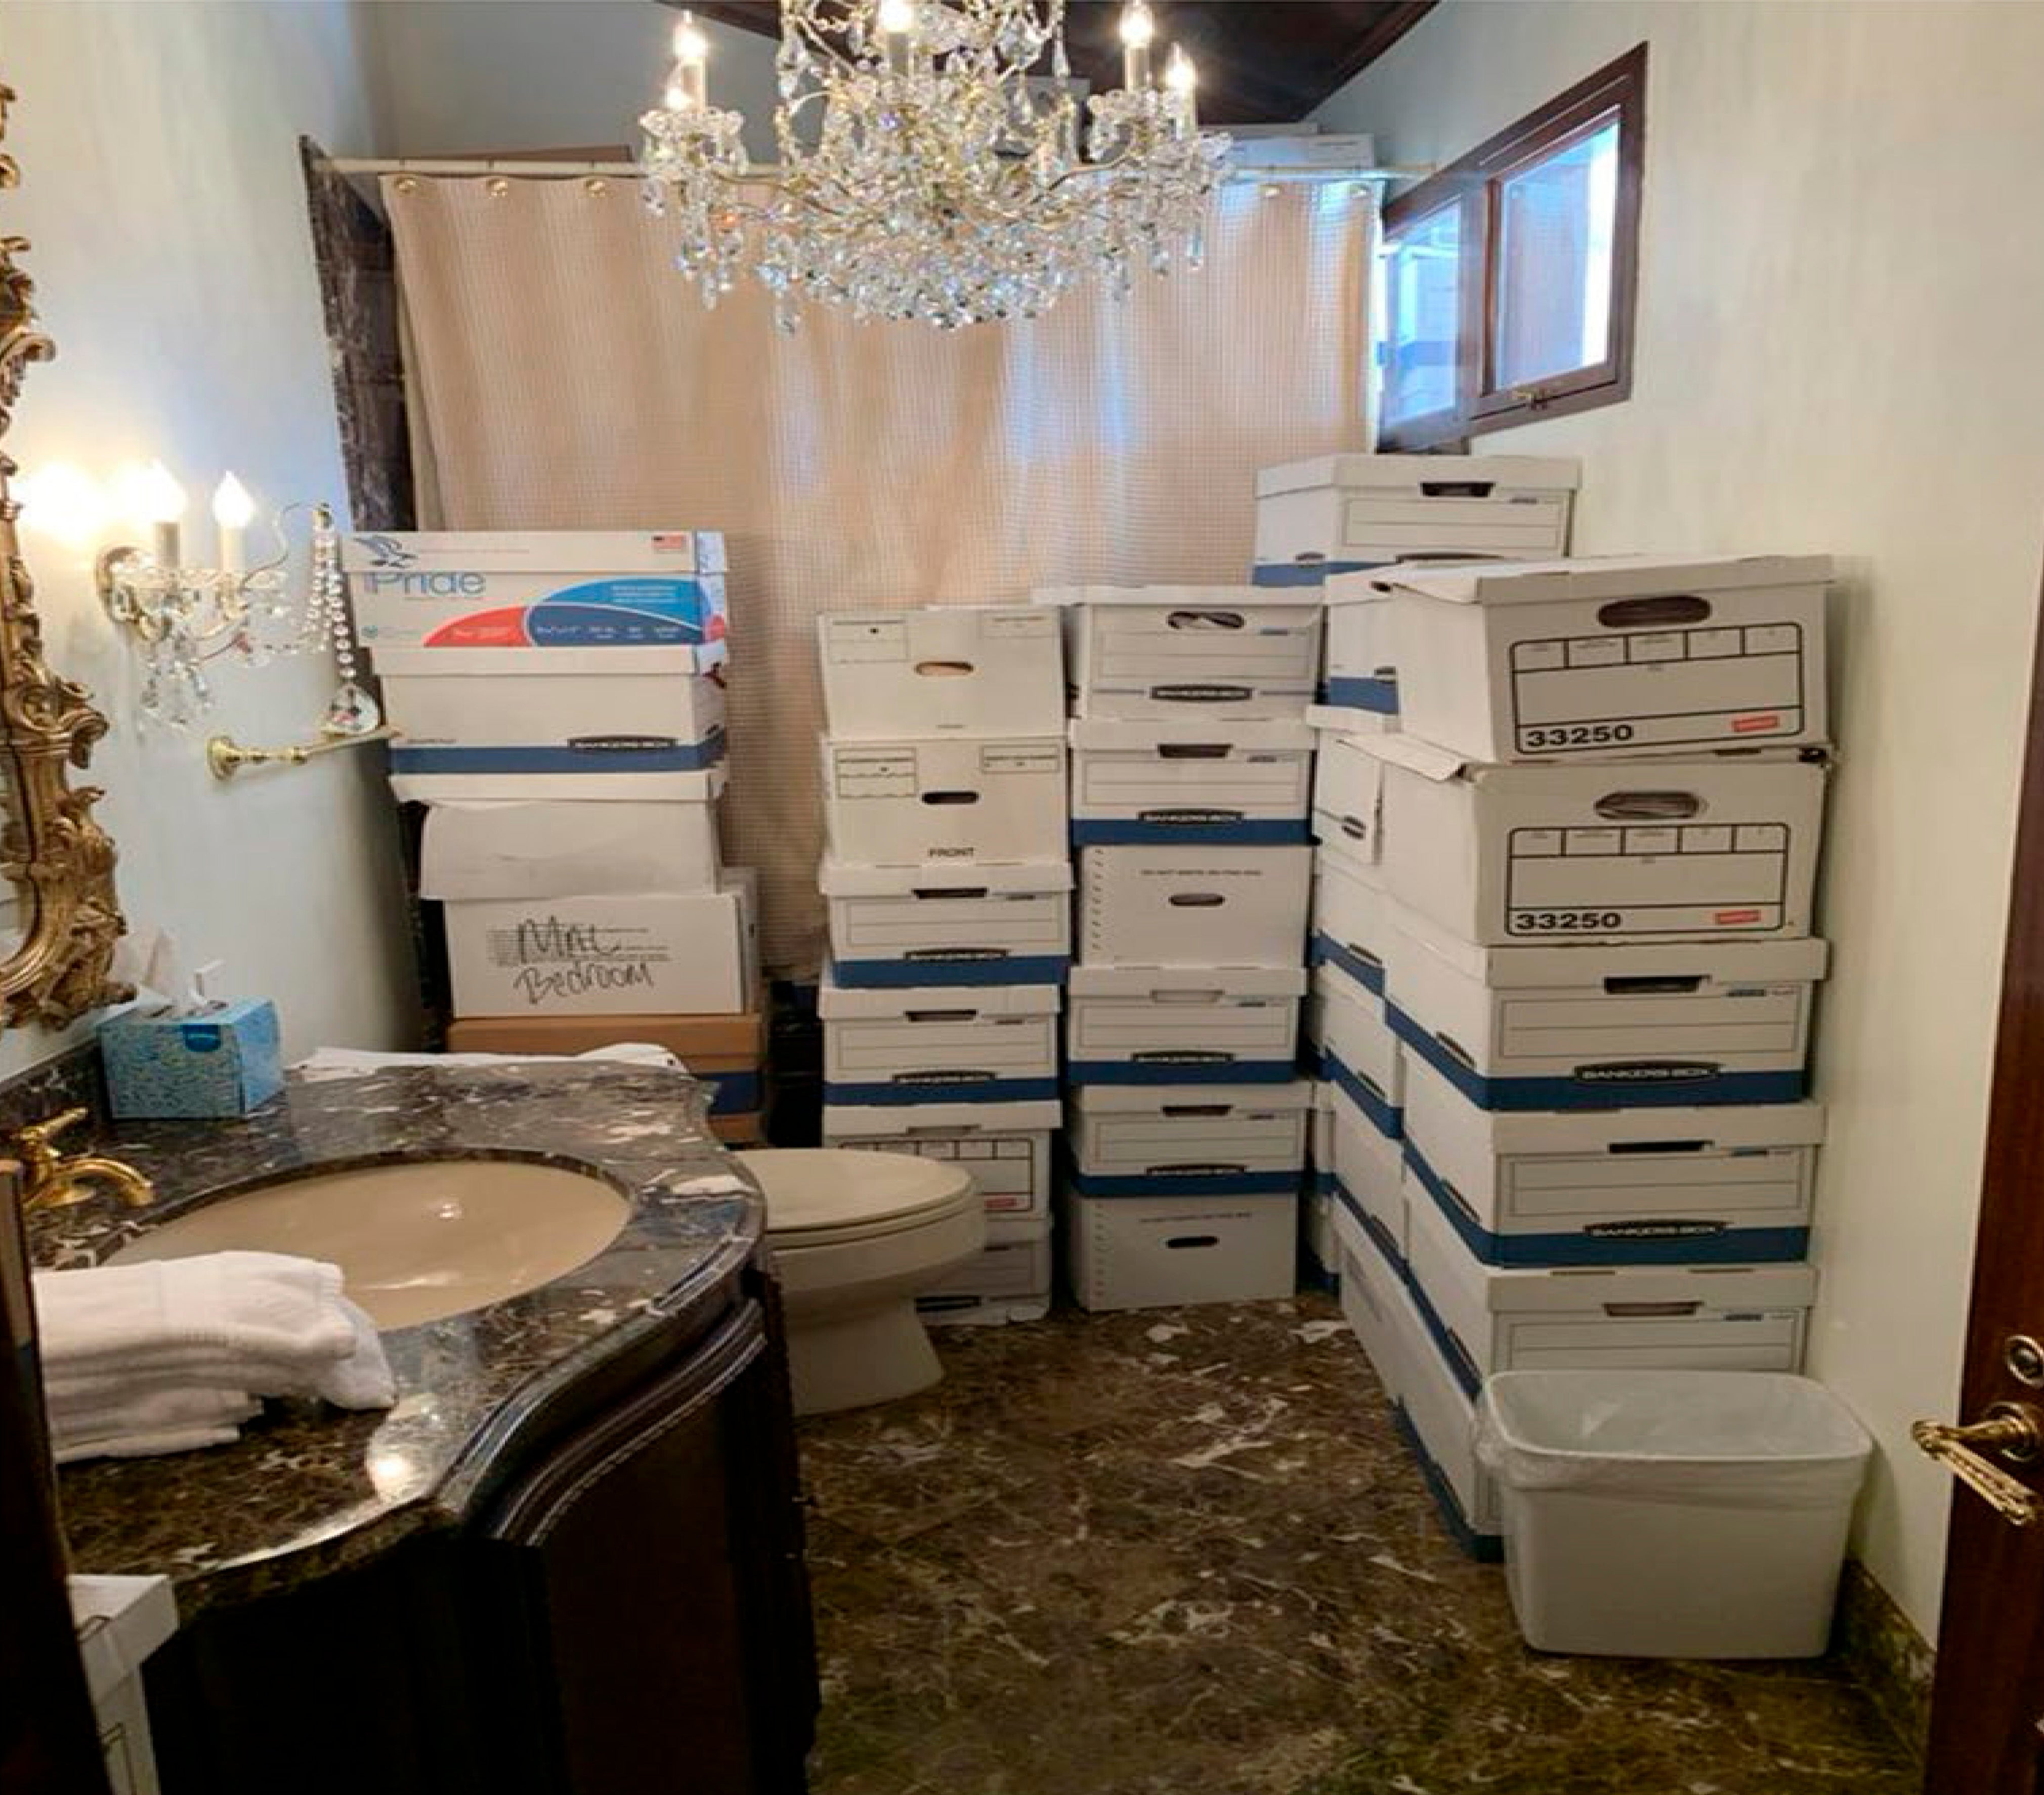 Boxes of classified documents pictured inside Mar-a-Lago bathroom